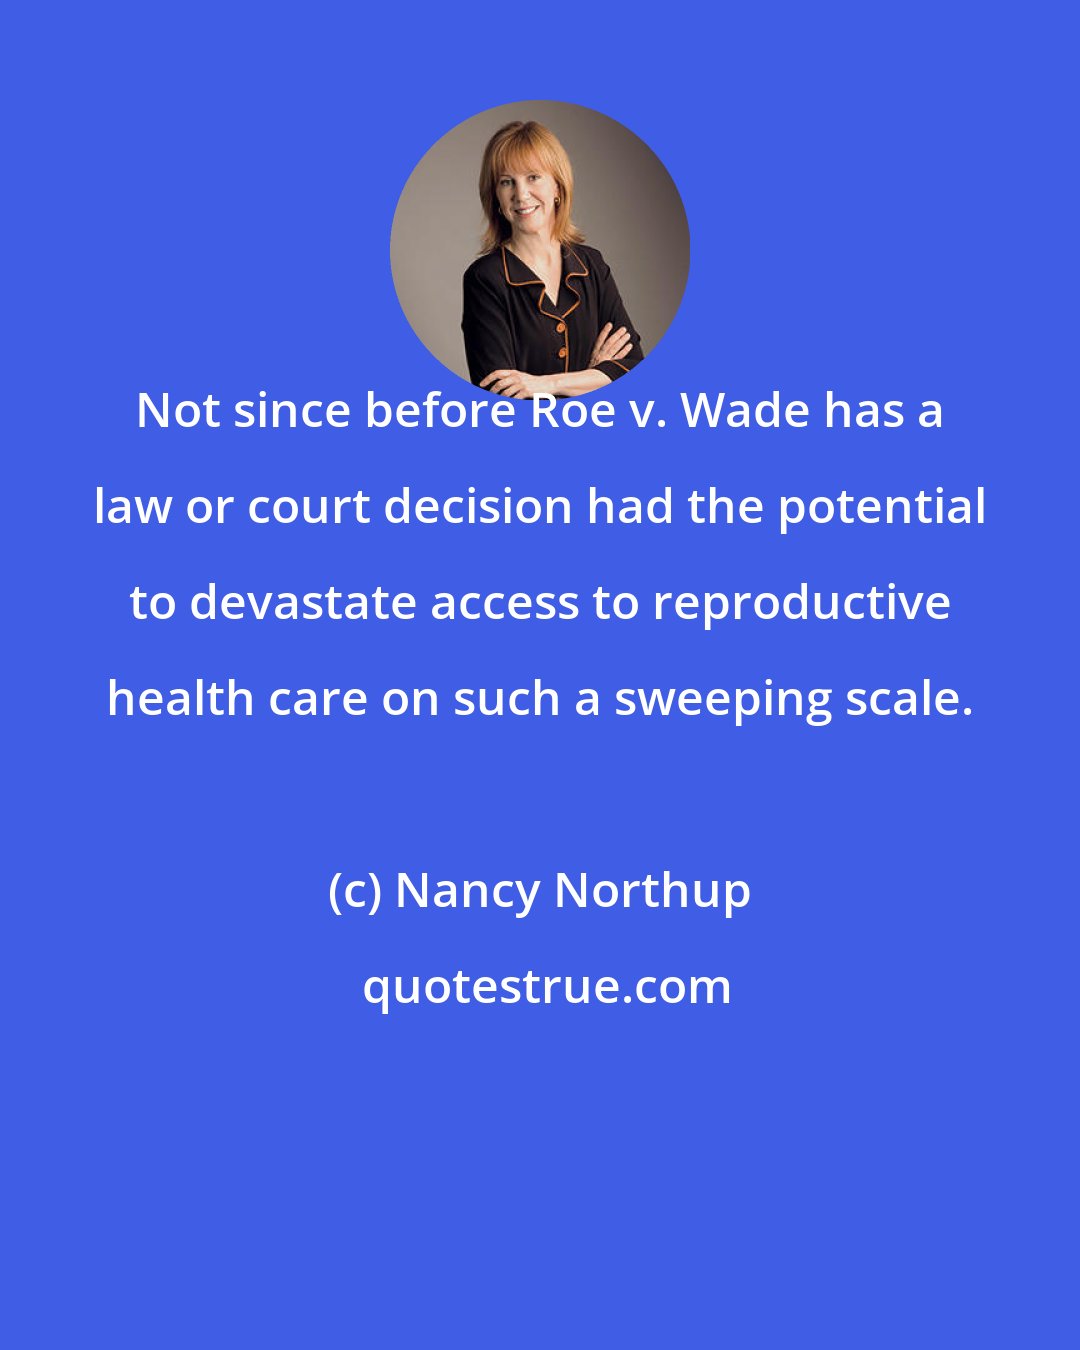 Nancy Northup: Not since before Roe v. Wade has a law or court decision had the potential to devastate access to reproductive health care on such a sweeping scale.